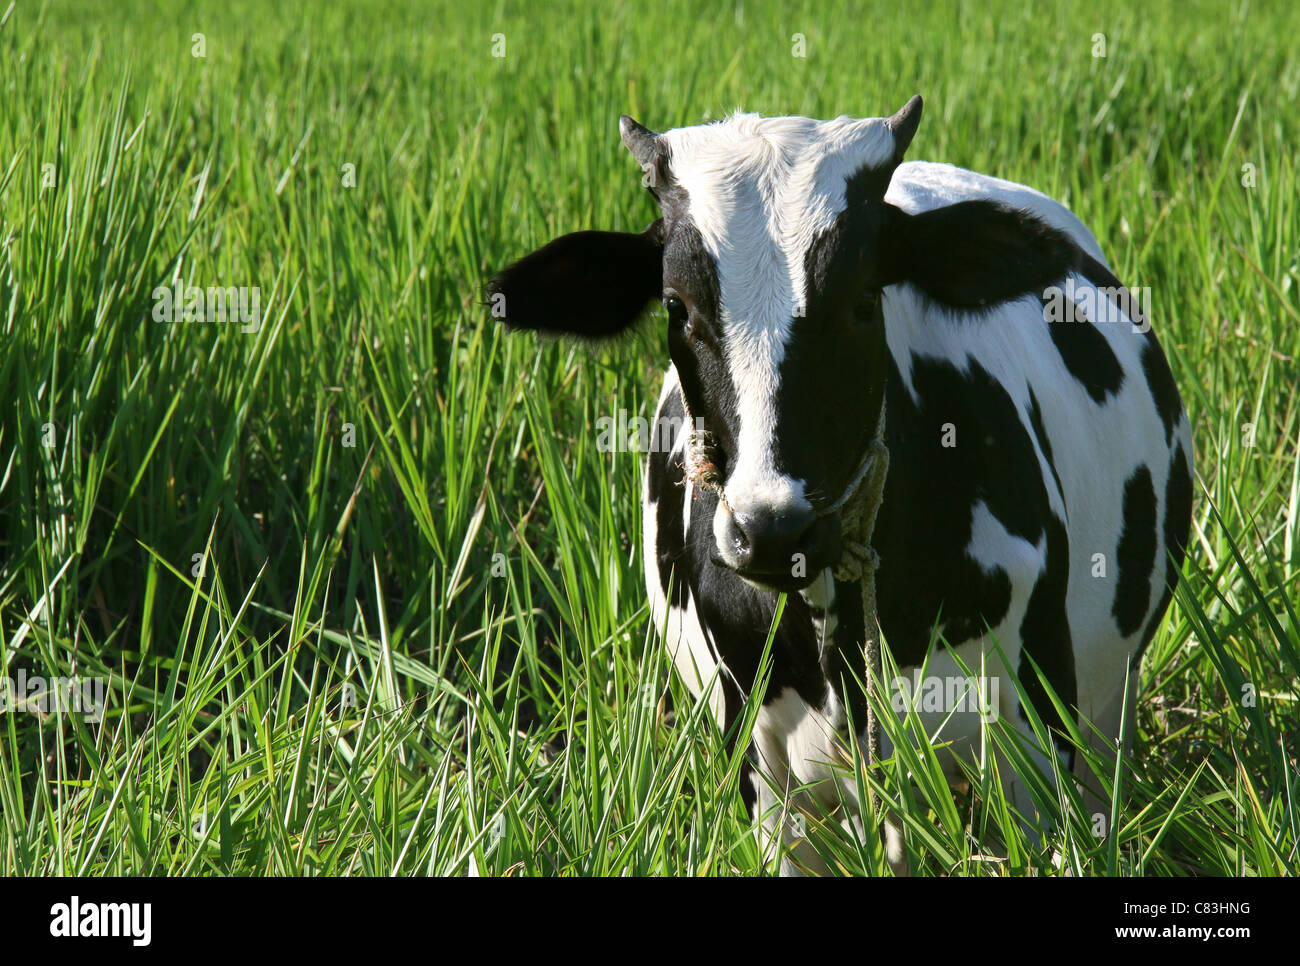 Black and white jersey breed cow in green grass Stock Photo